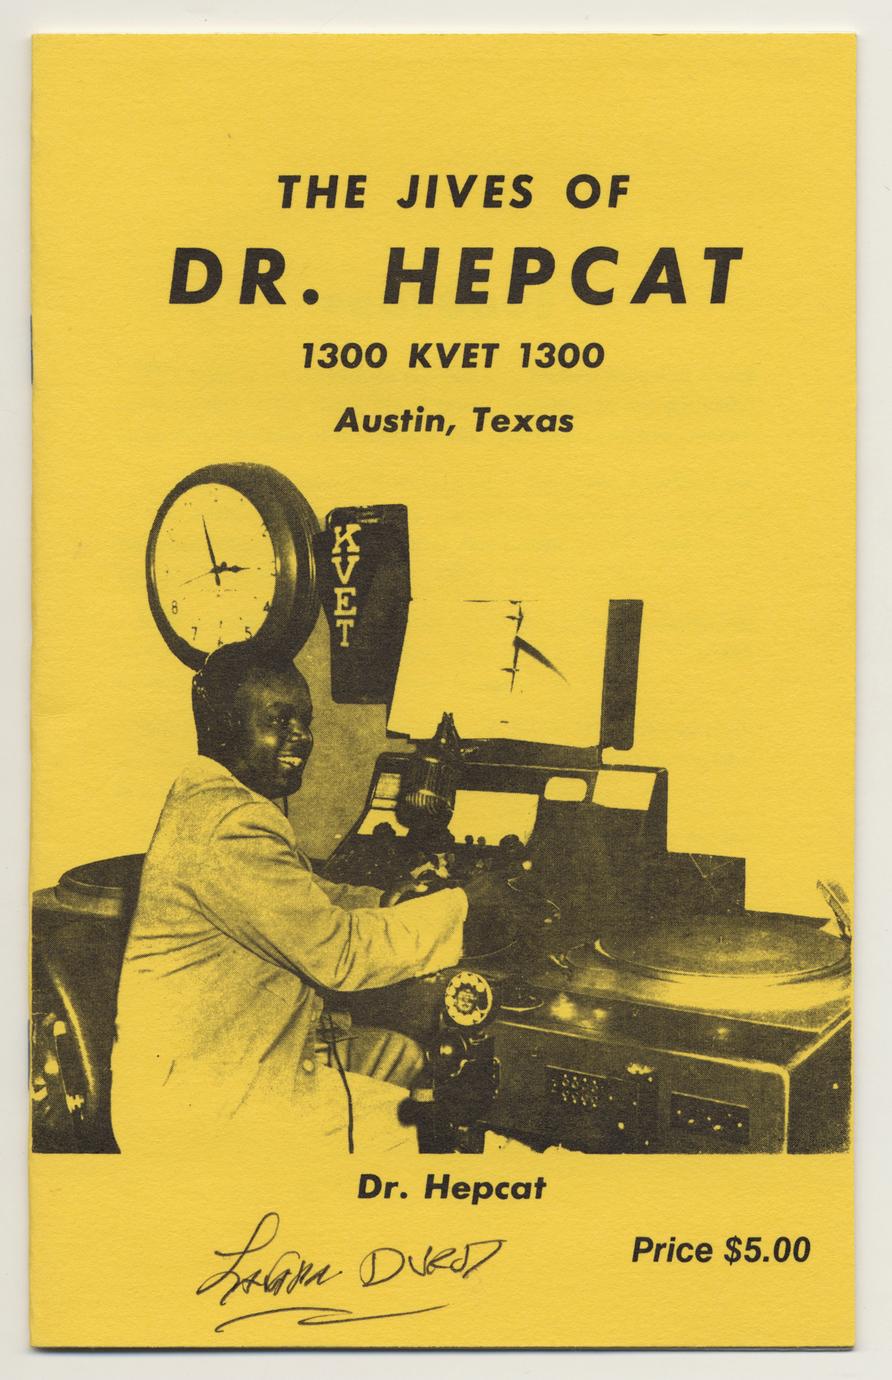 The blues and jives of Dr. Hepcat (1 of 2)